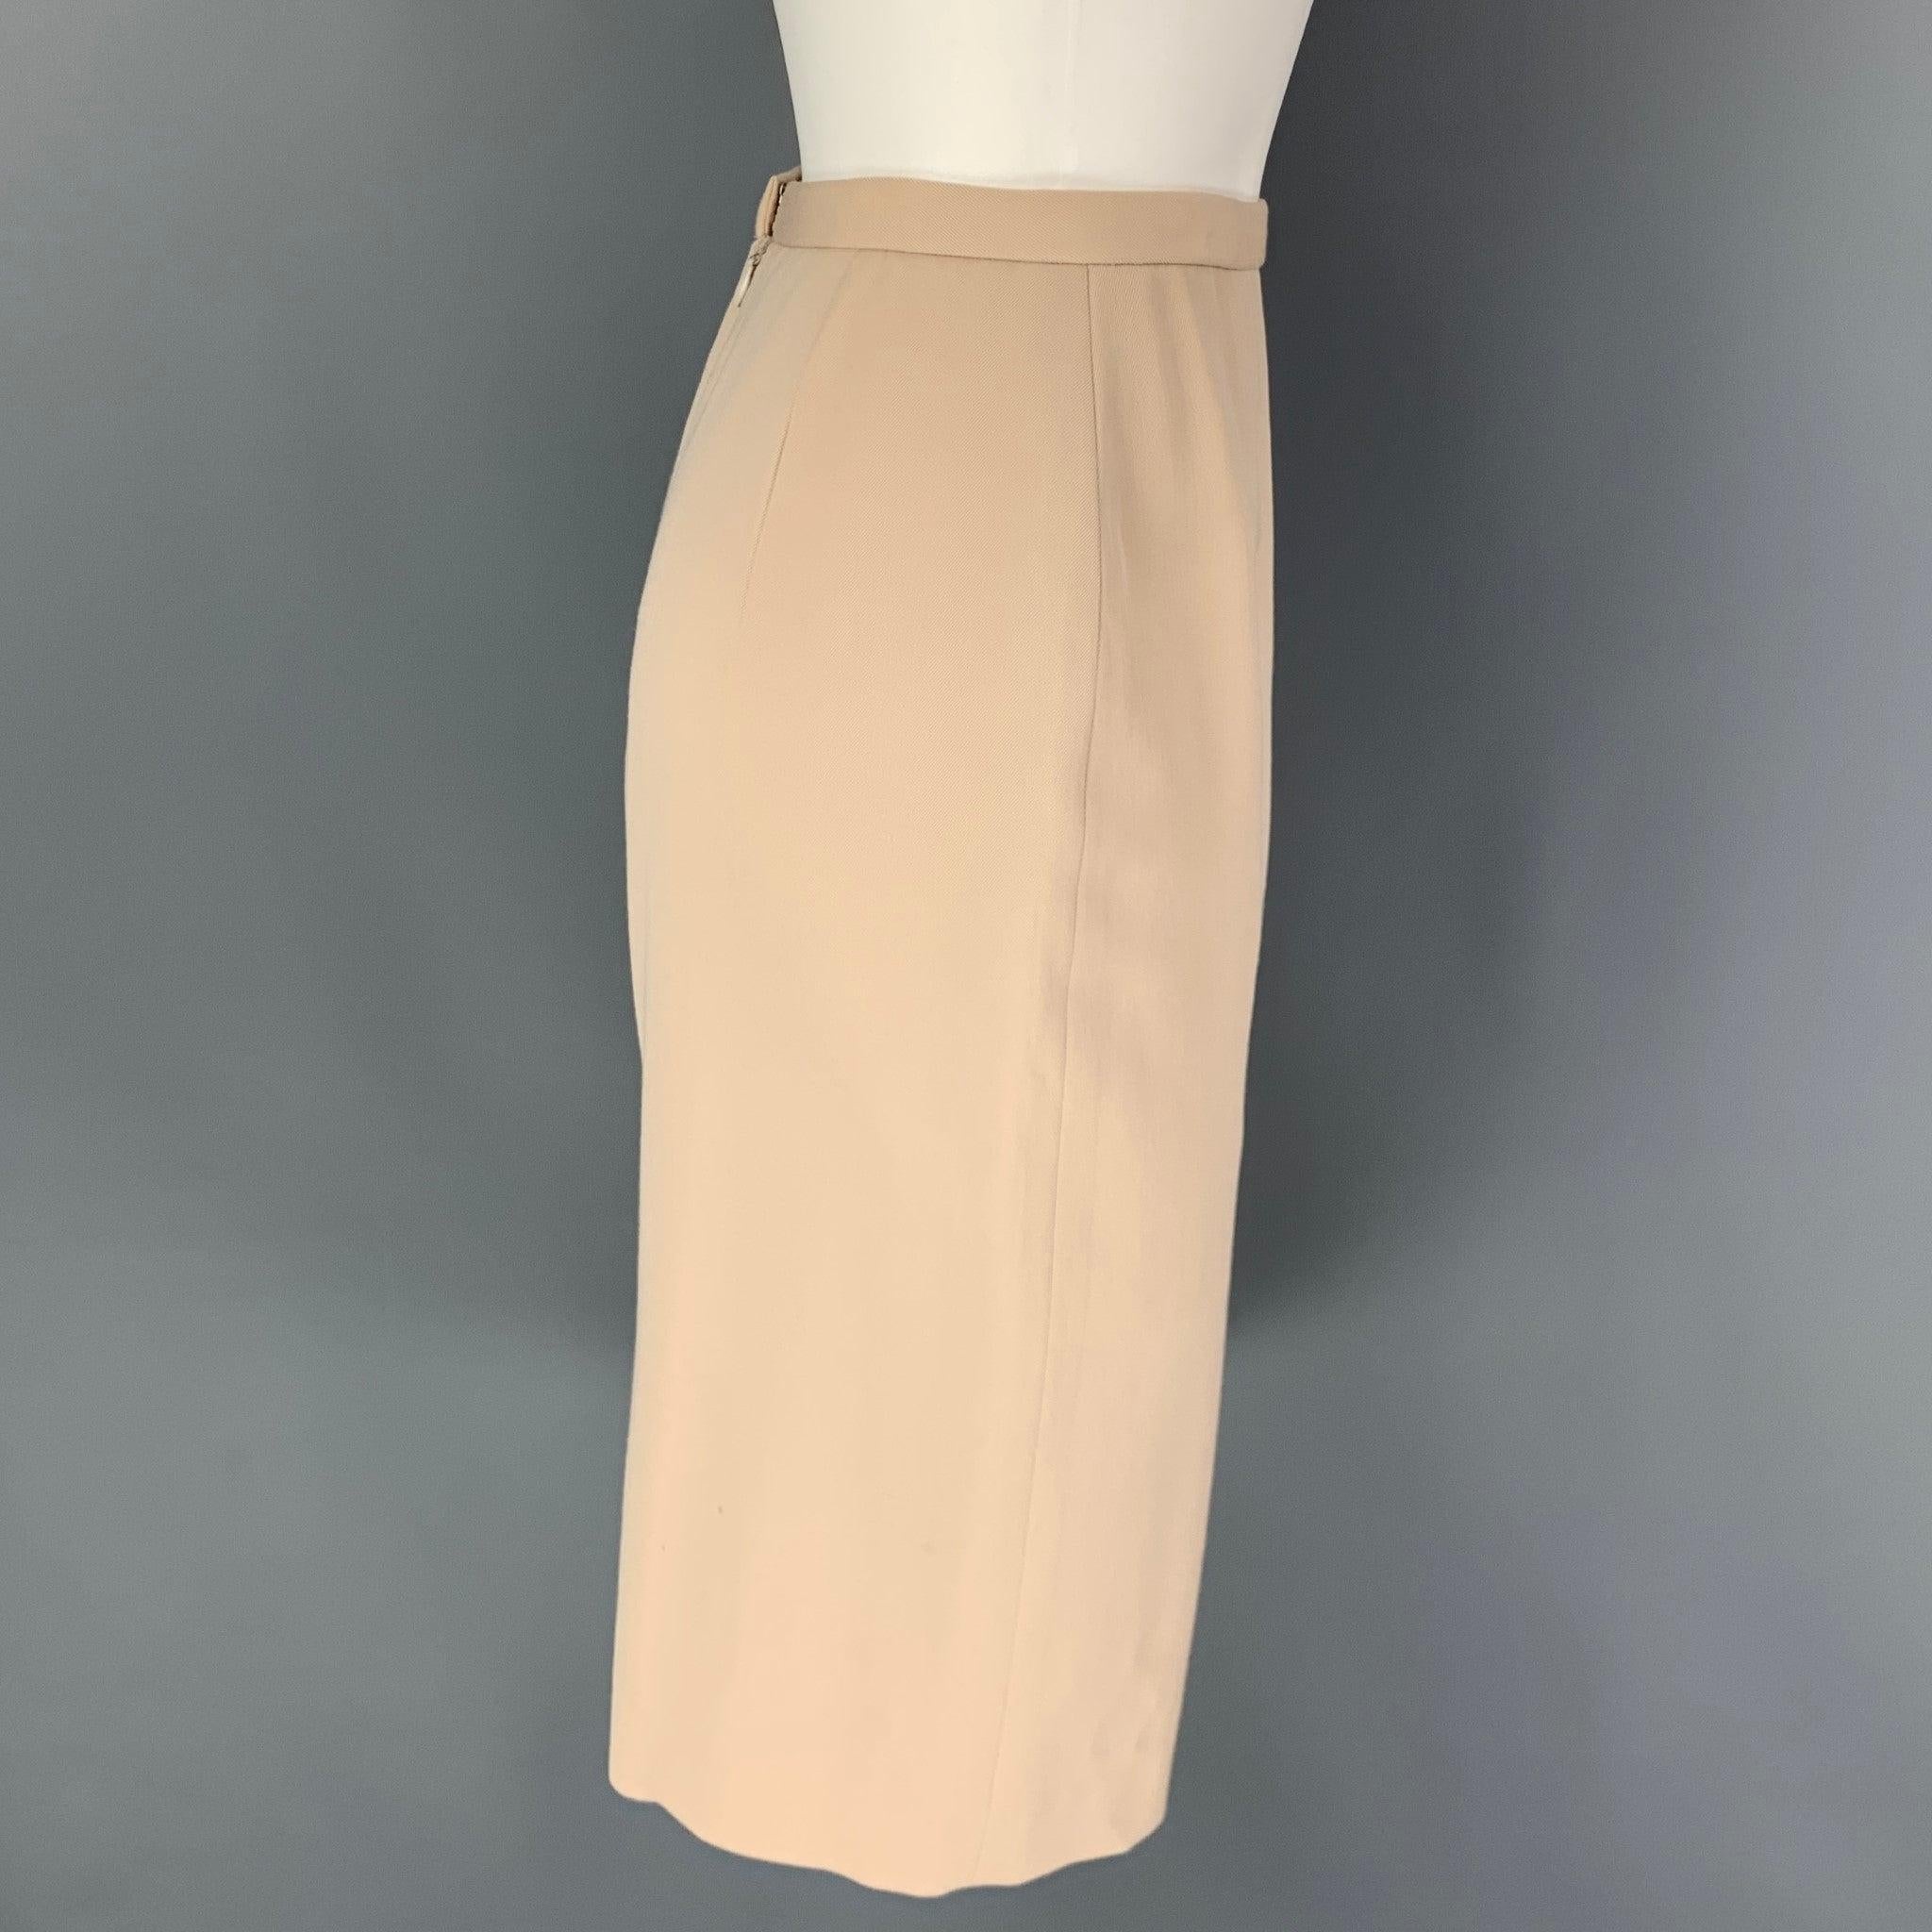 DONNA KARAN skirt comes in a beige wool with a slip liner featuring a pencil style, back slit, and a back zipper closure. Made in USA.
Very Good Pre-Owned Condition. 

Marked:   8 

Measurements: 
  Waist: 28 inches Hip: 38 inches Length: 26 inches